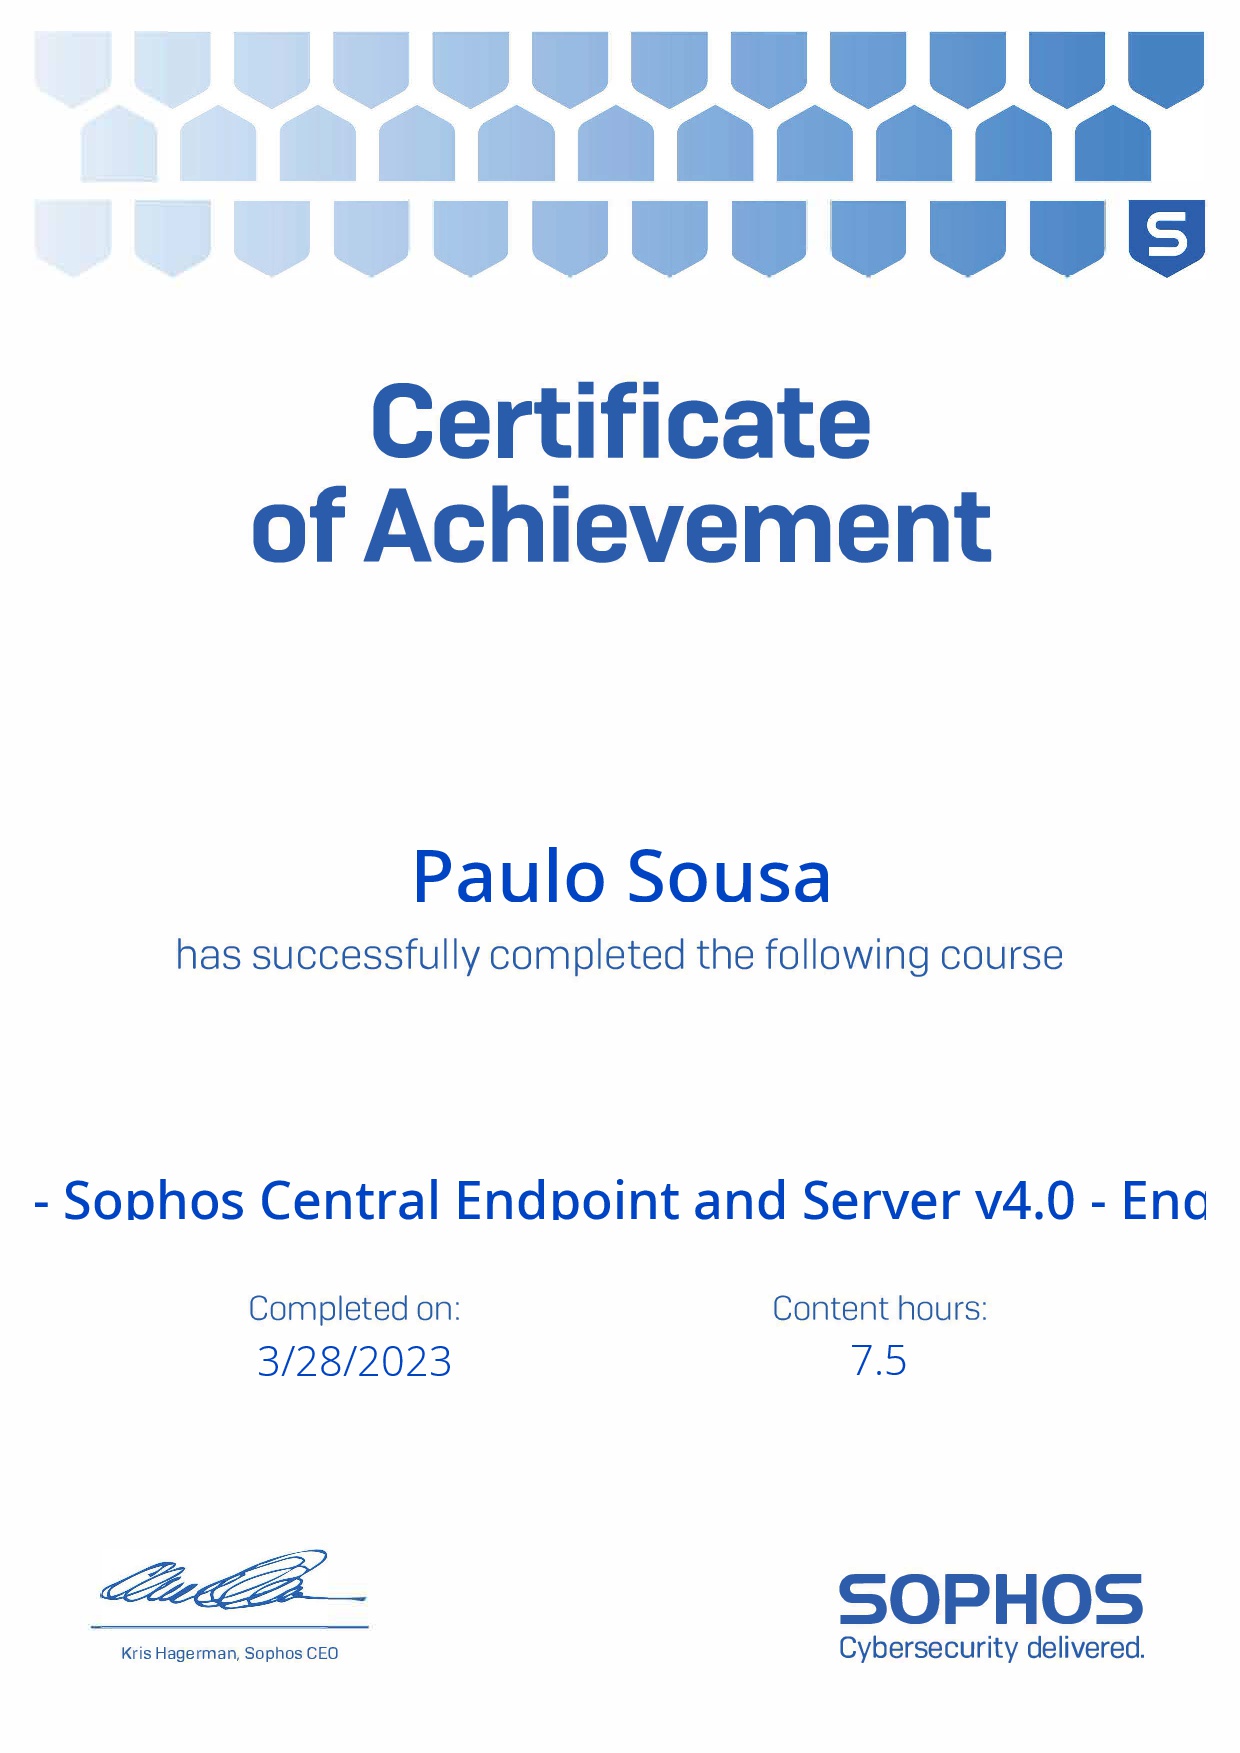 Sophos Engineer Central Endpoint Paulo 2023